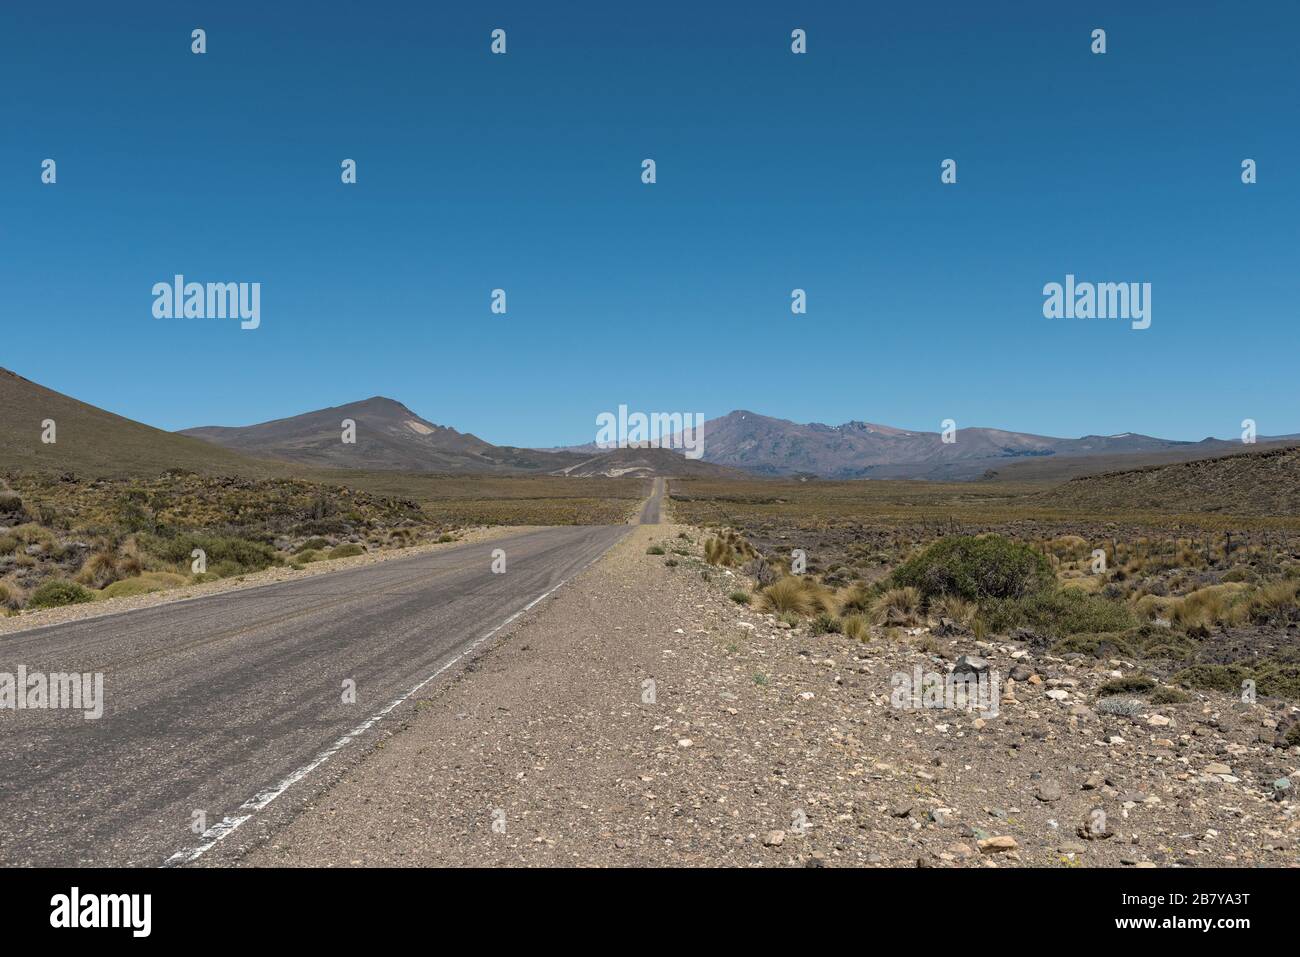 Deserted landscape in the province of Neuquen, Argentina Stock Photo